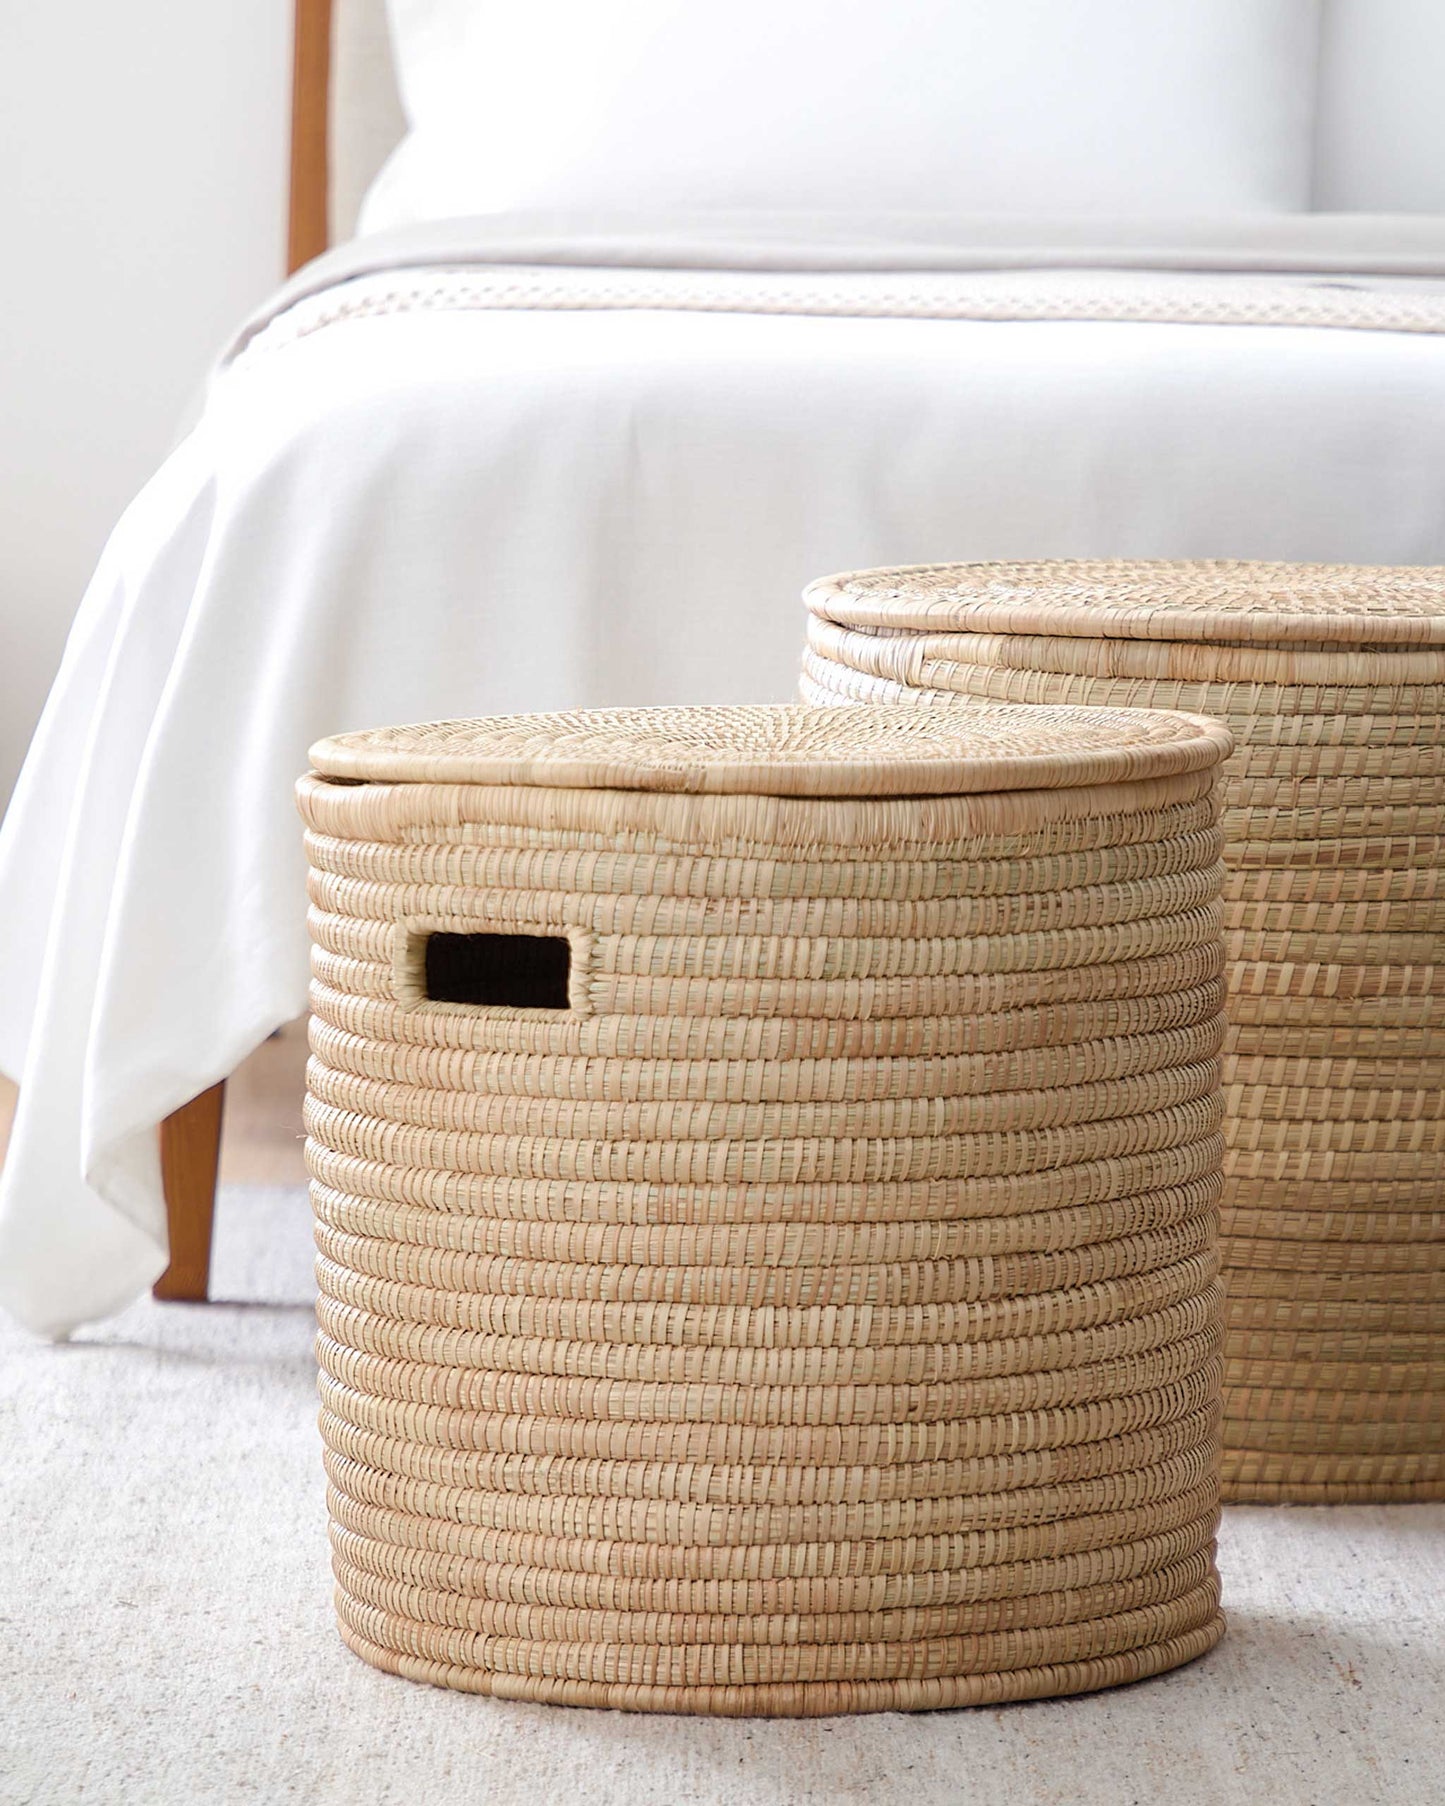 
                  
                    Handwoven storage baskets at foot of bed. Salima baskets by Fairkind.
                  
                